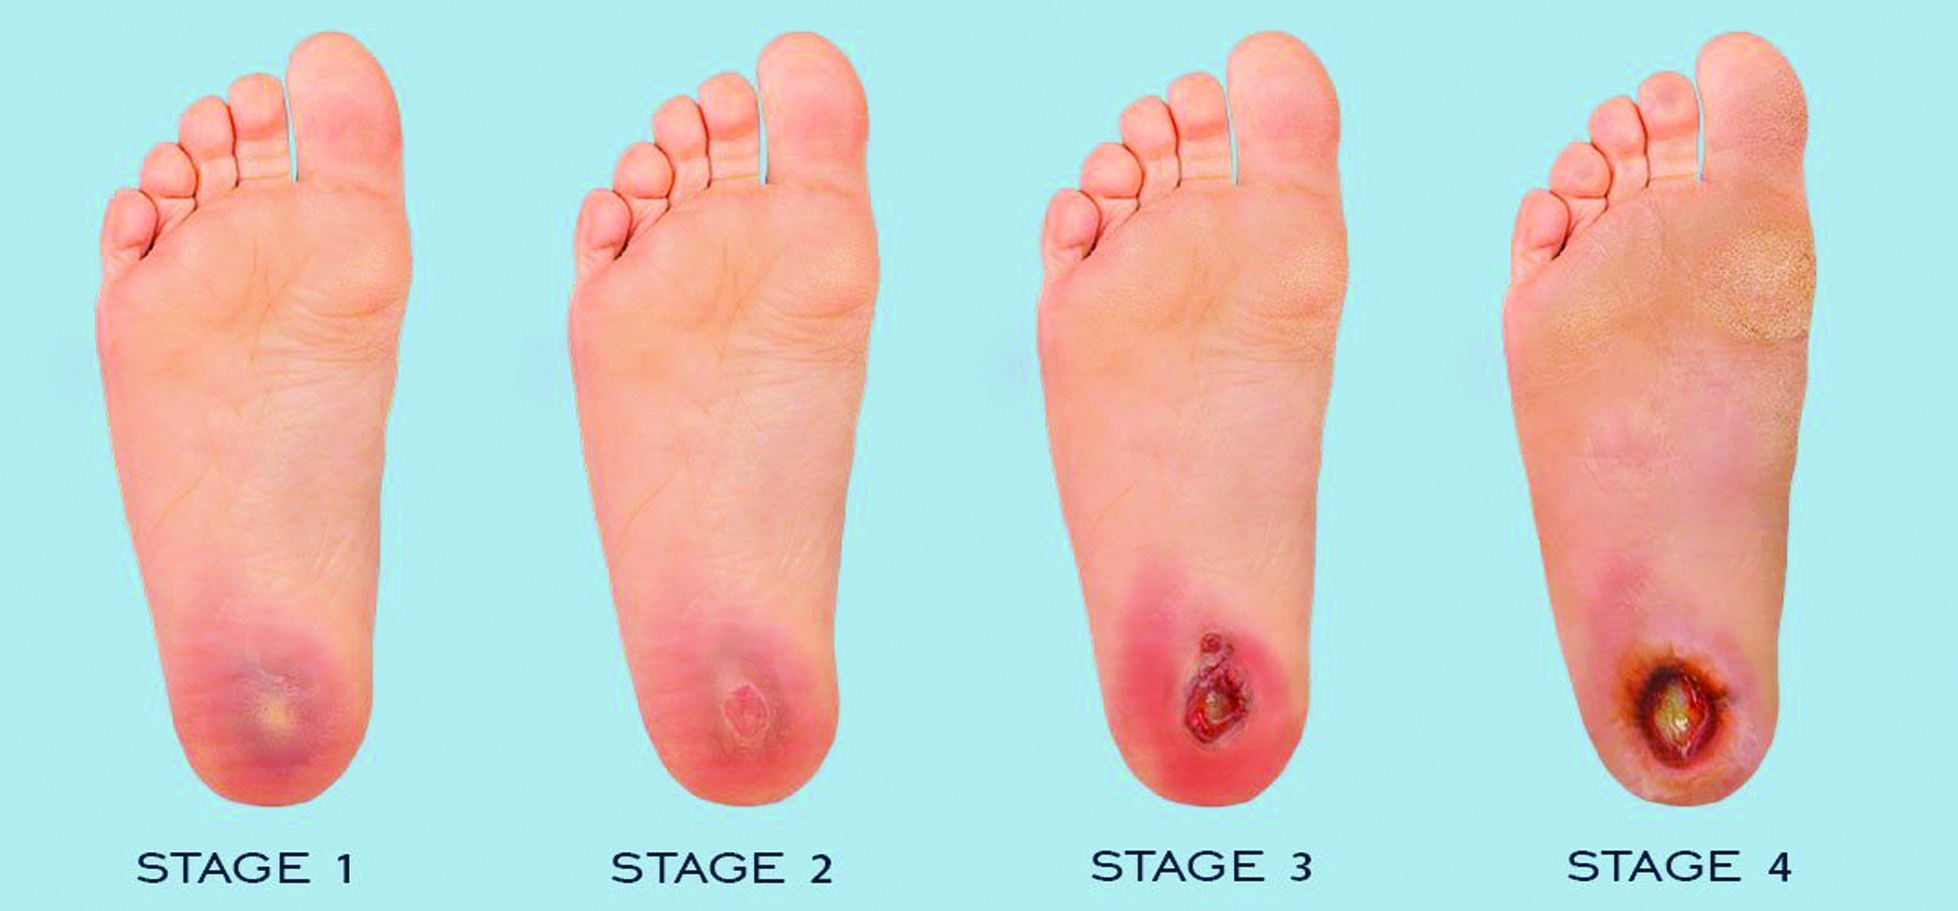 diabetic foot ulcer stages